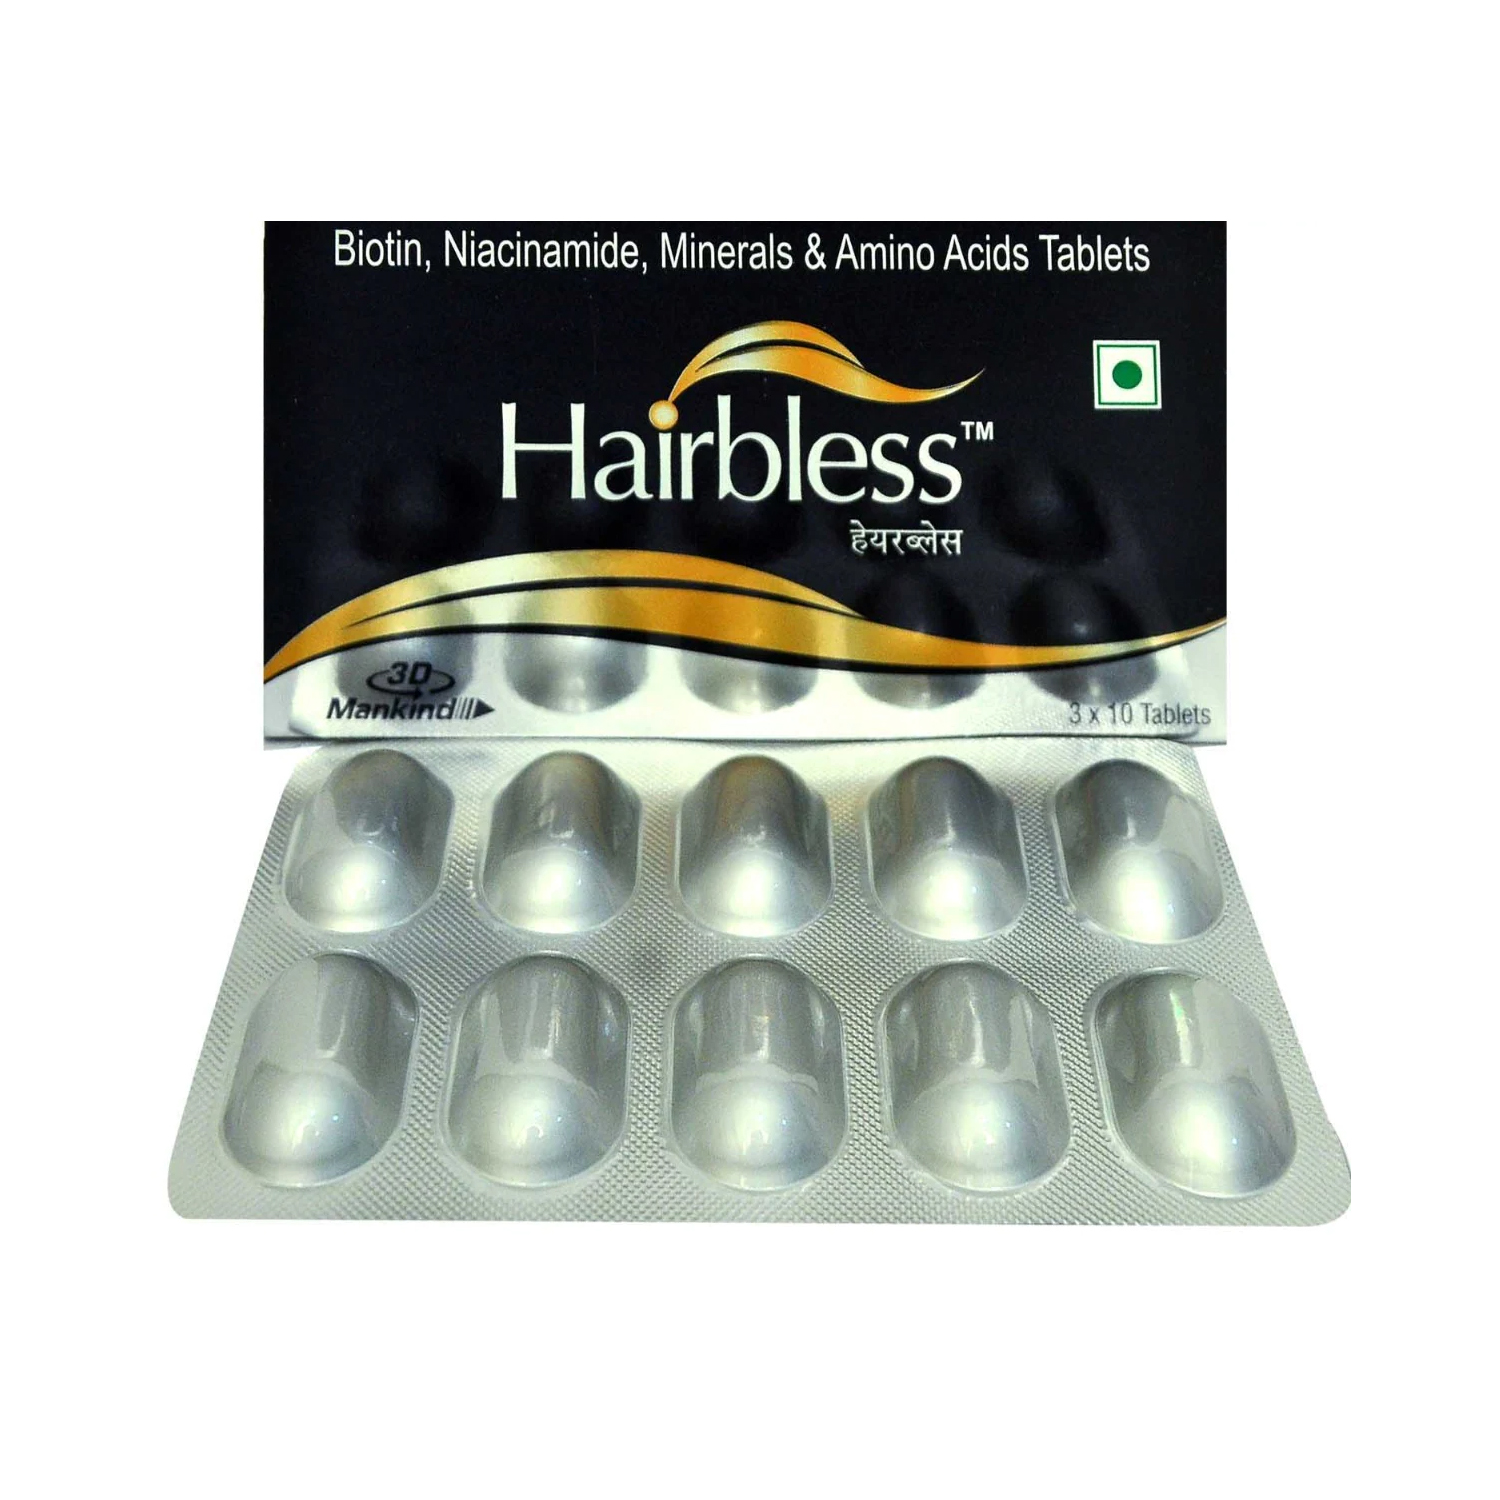 Hairbless Tablets 3 Strips of 10 tabs - Box of 30 Tablets